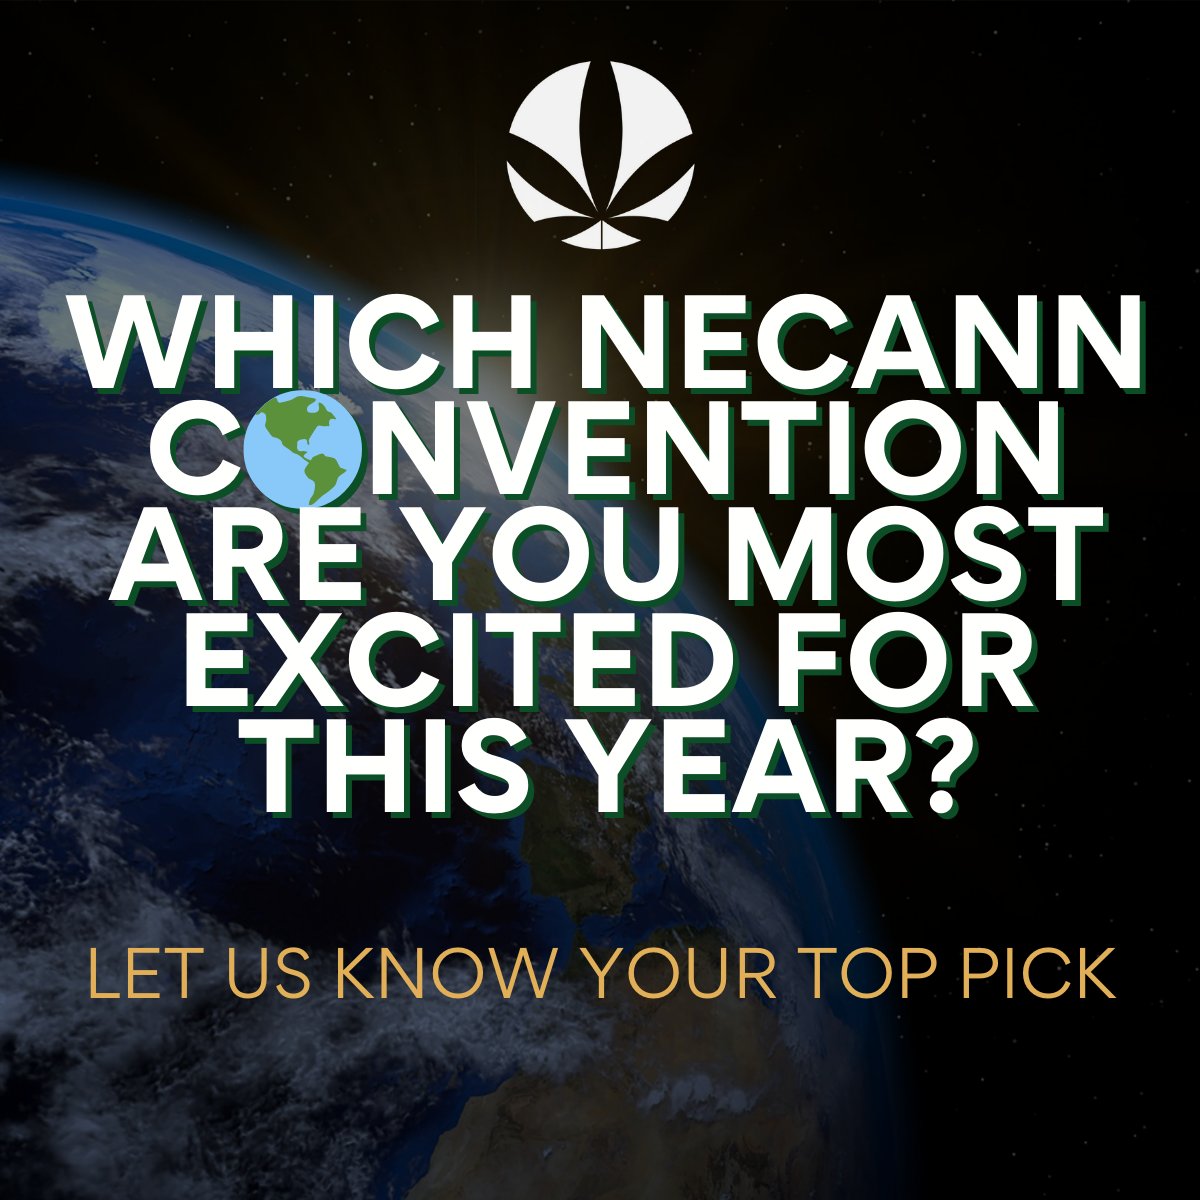 Which NECANN convention are you most excited for this year? Drop your top picks for this year's conventions in the comments below! #ConventionExcitement #2024